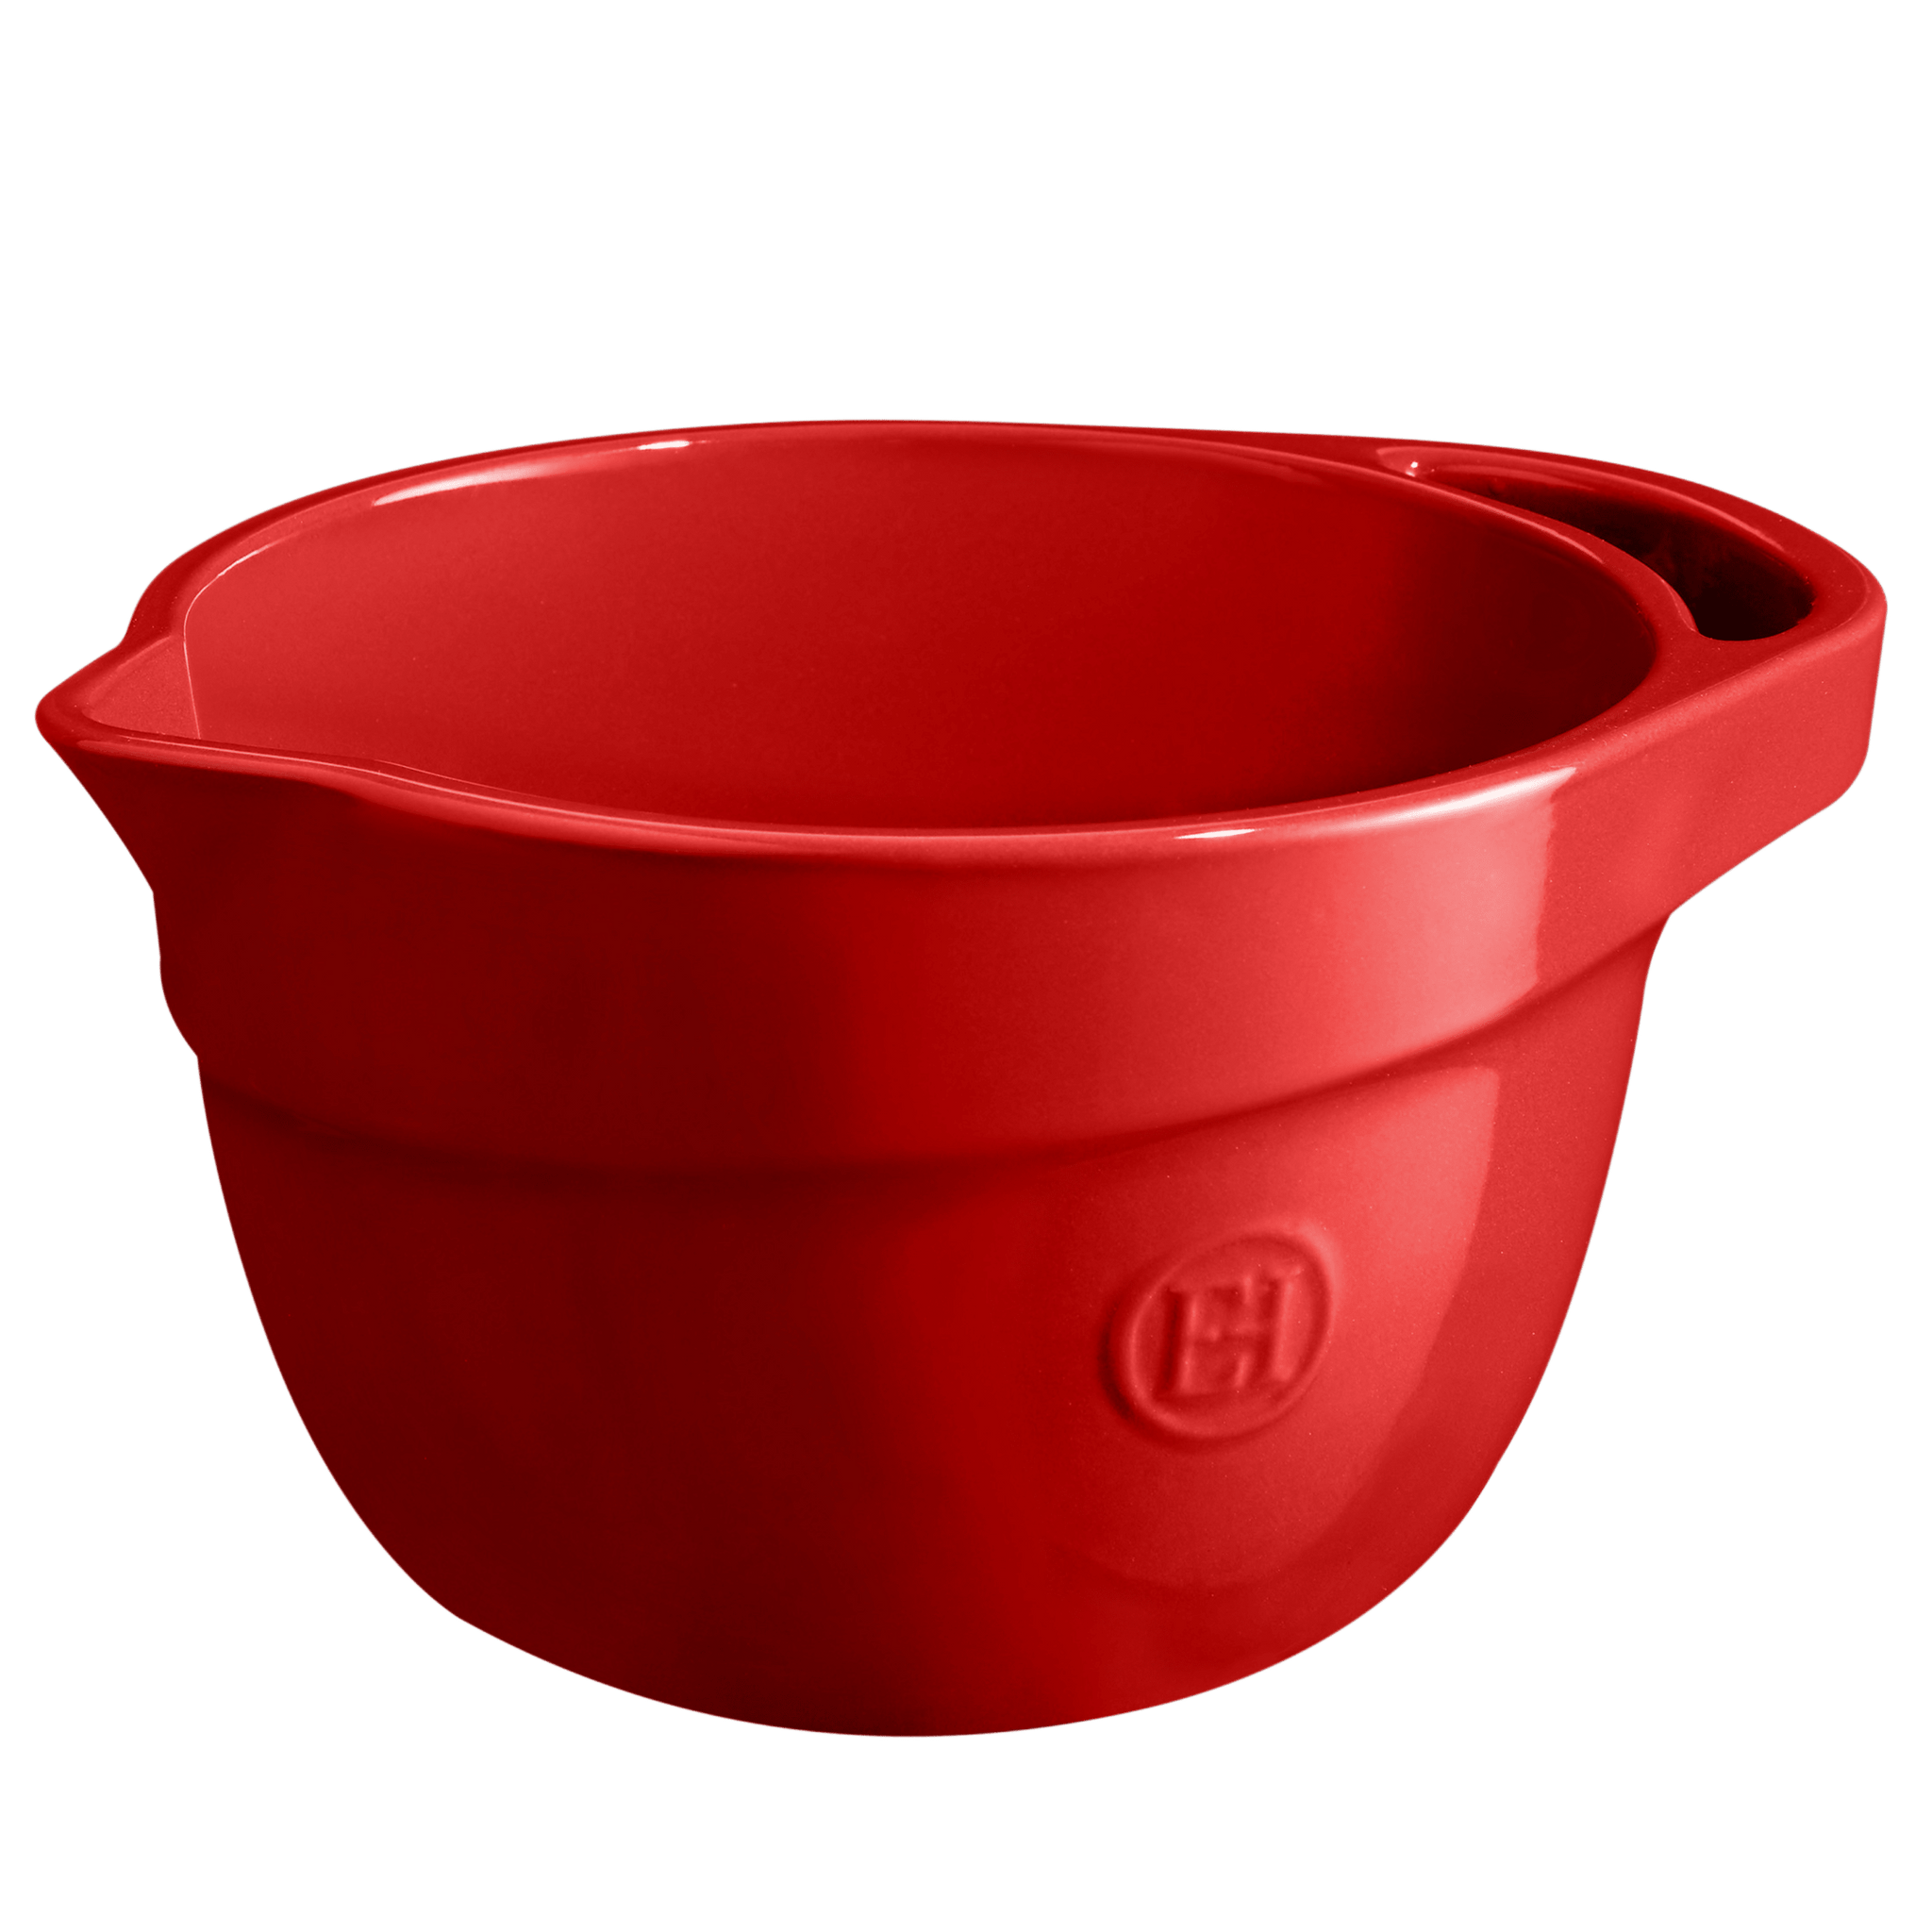 Insulated S/S Mixing Bowl, 1 Quart